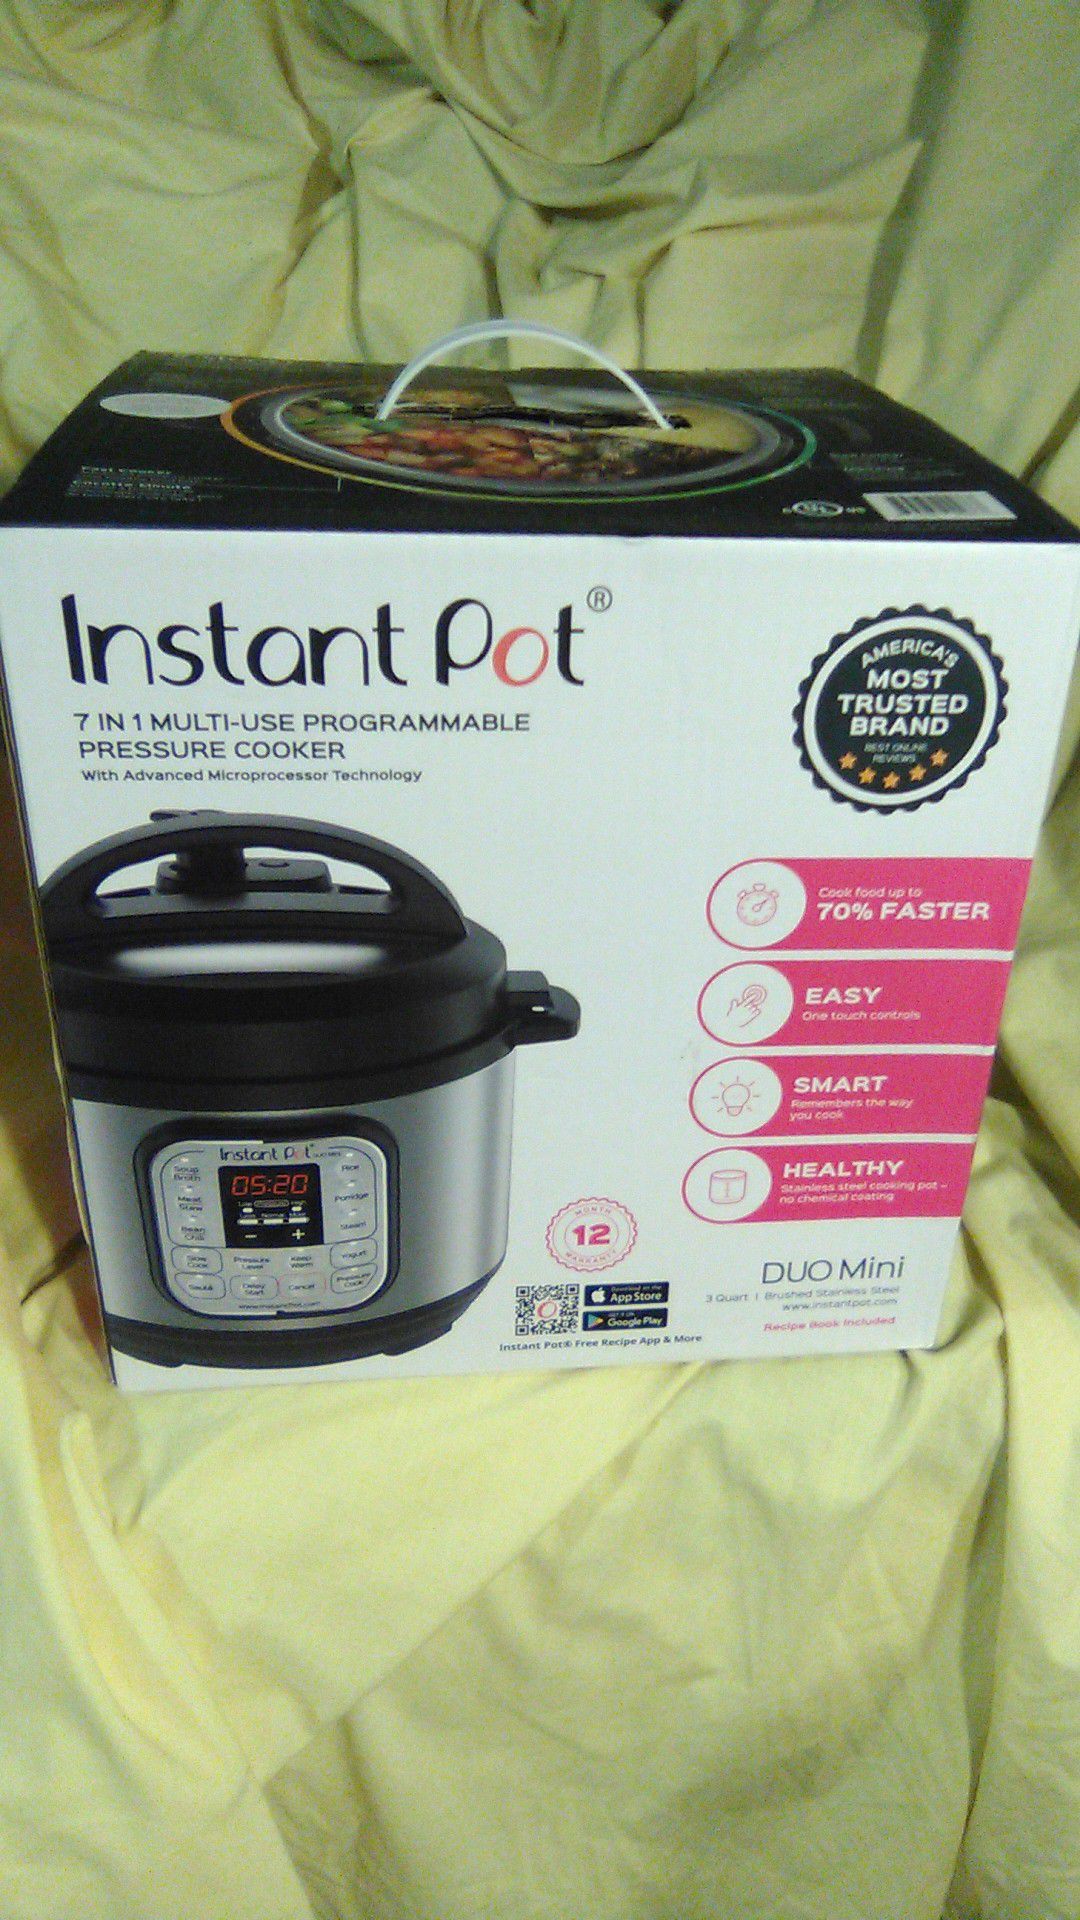 Instant pot 7in1 multi-use programmable pressure cooker